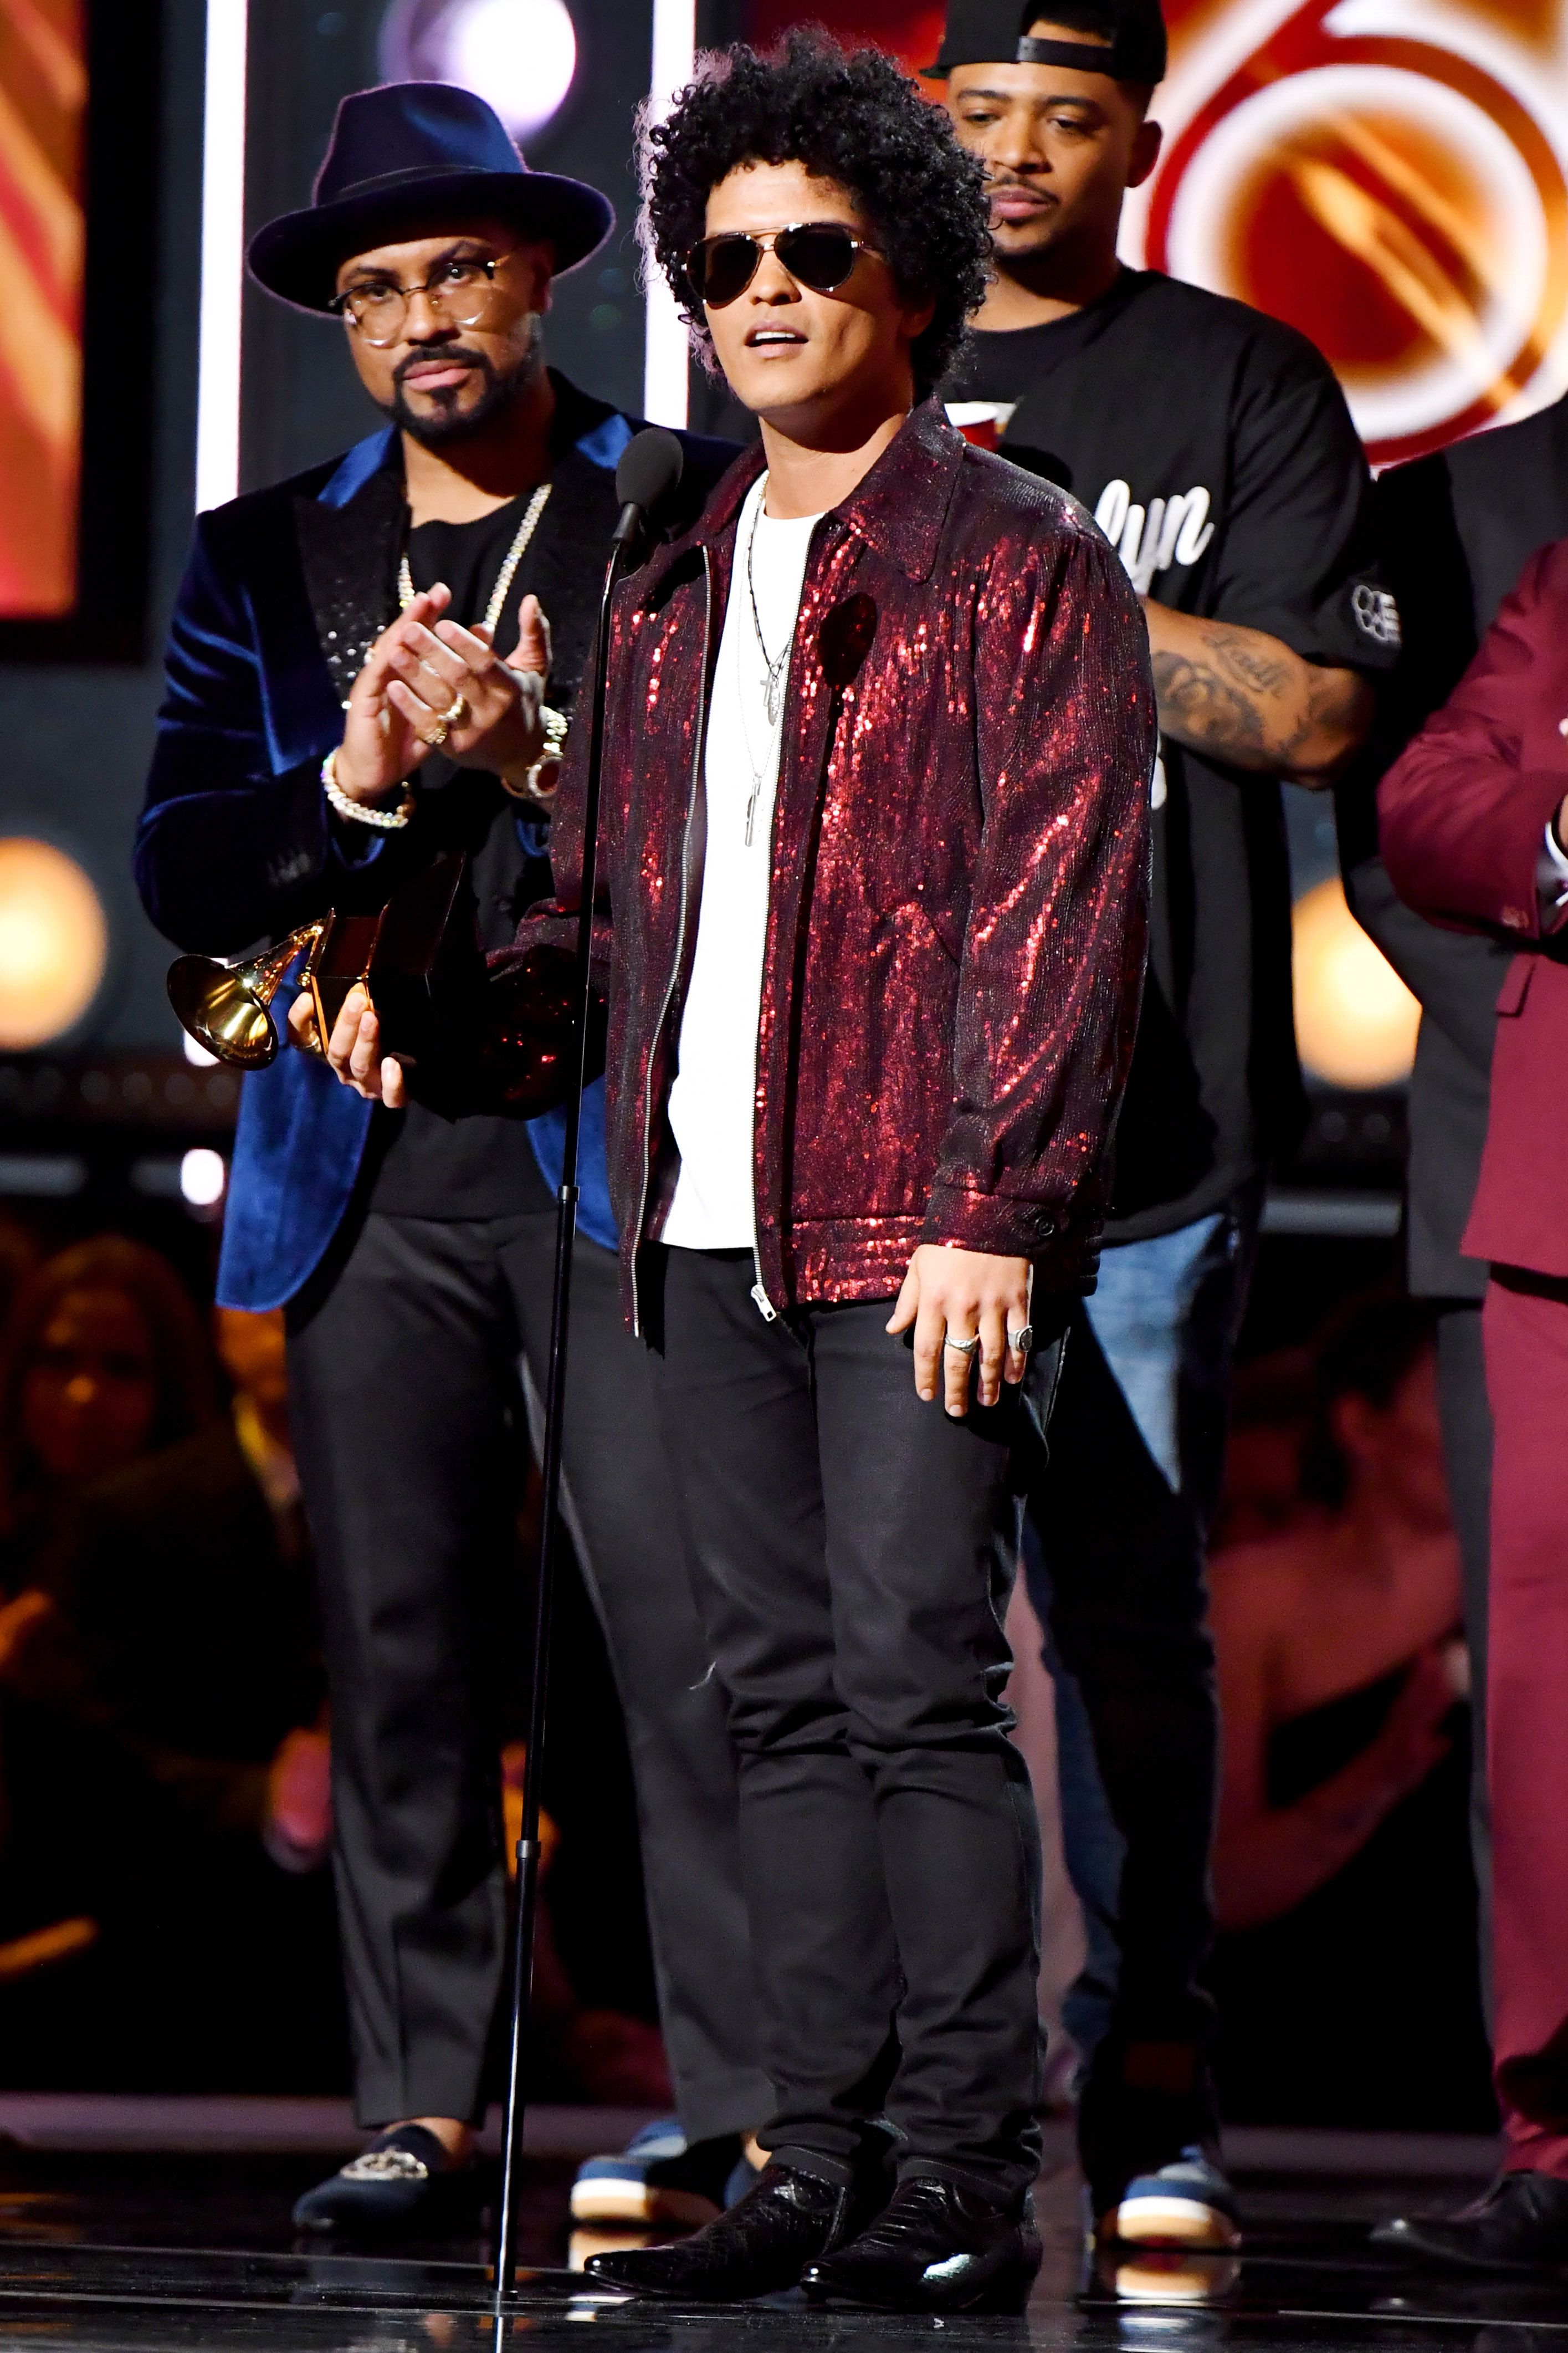 Doelwit Meander Woord Bruno Mars' Style Is Completely Over the Top and That's the Whole Point